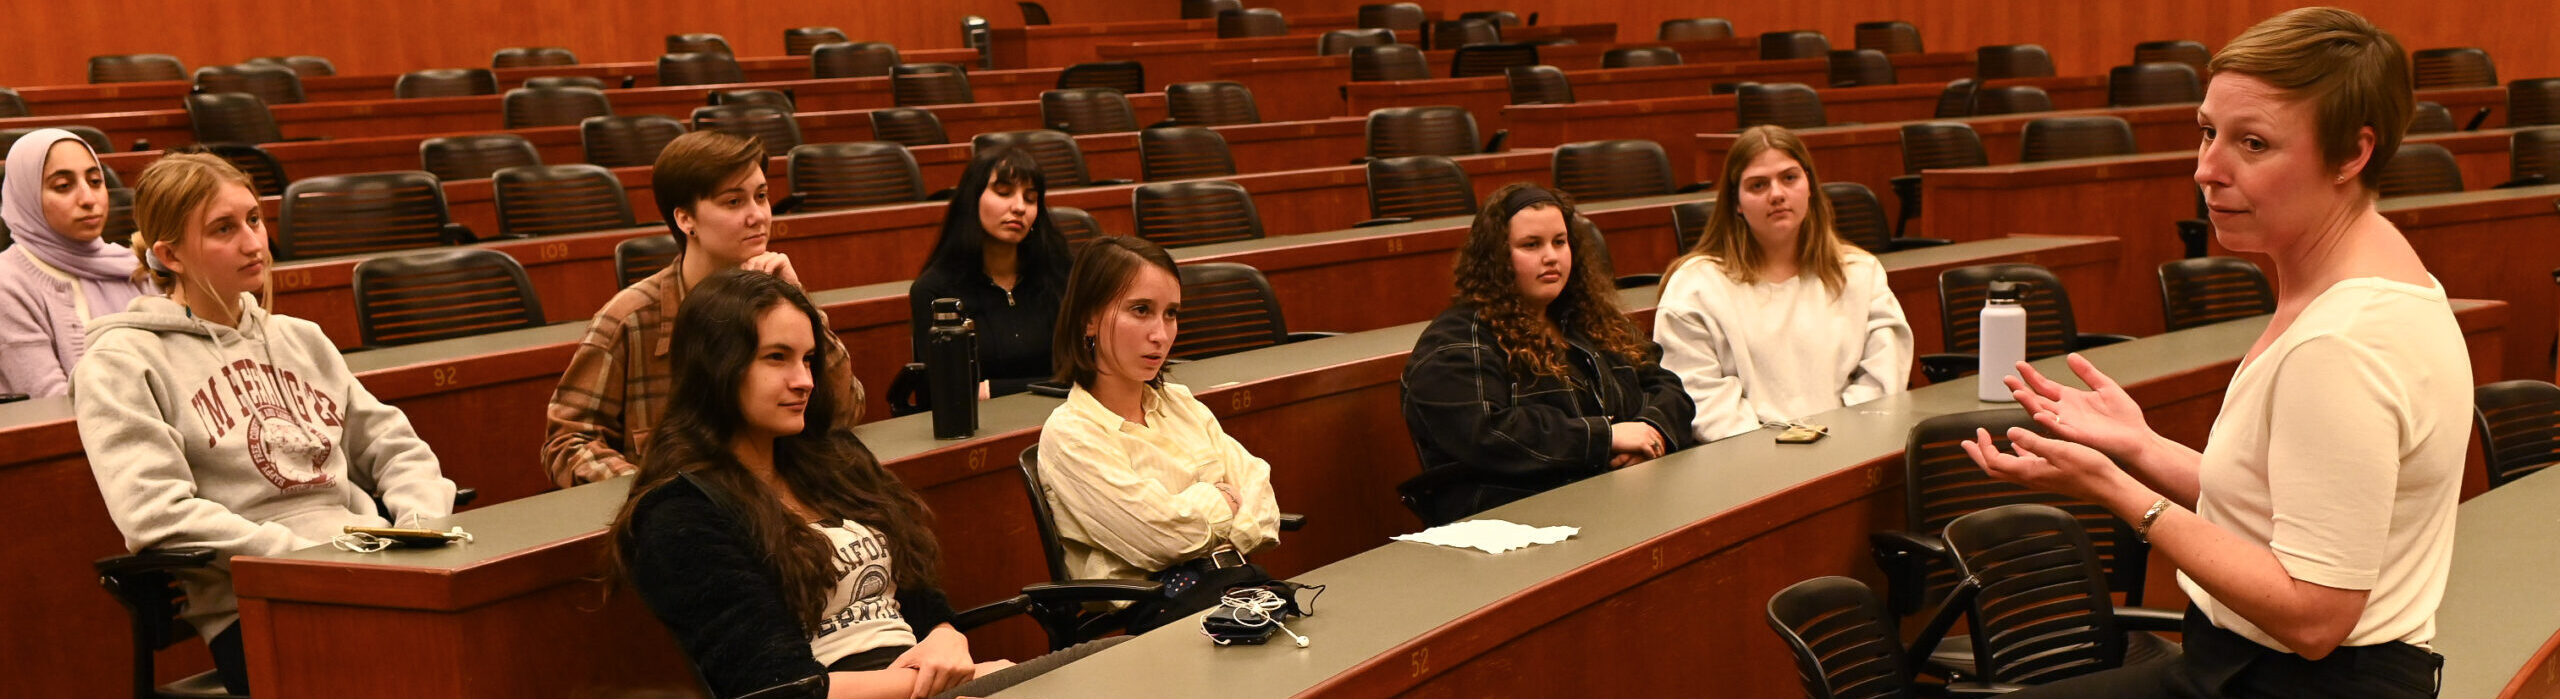 A woman speaks to a group of young adults in a large room.